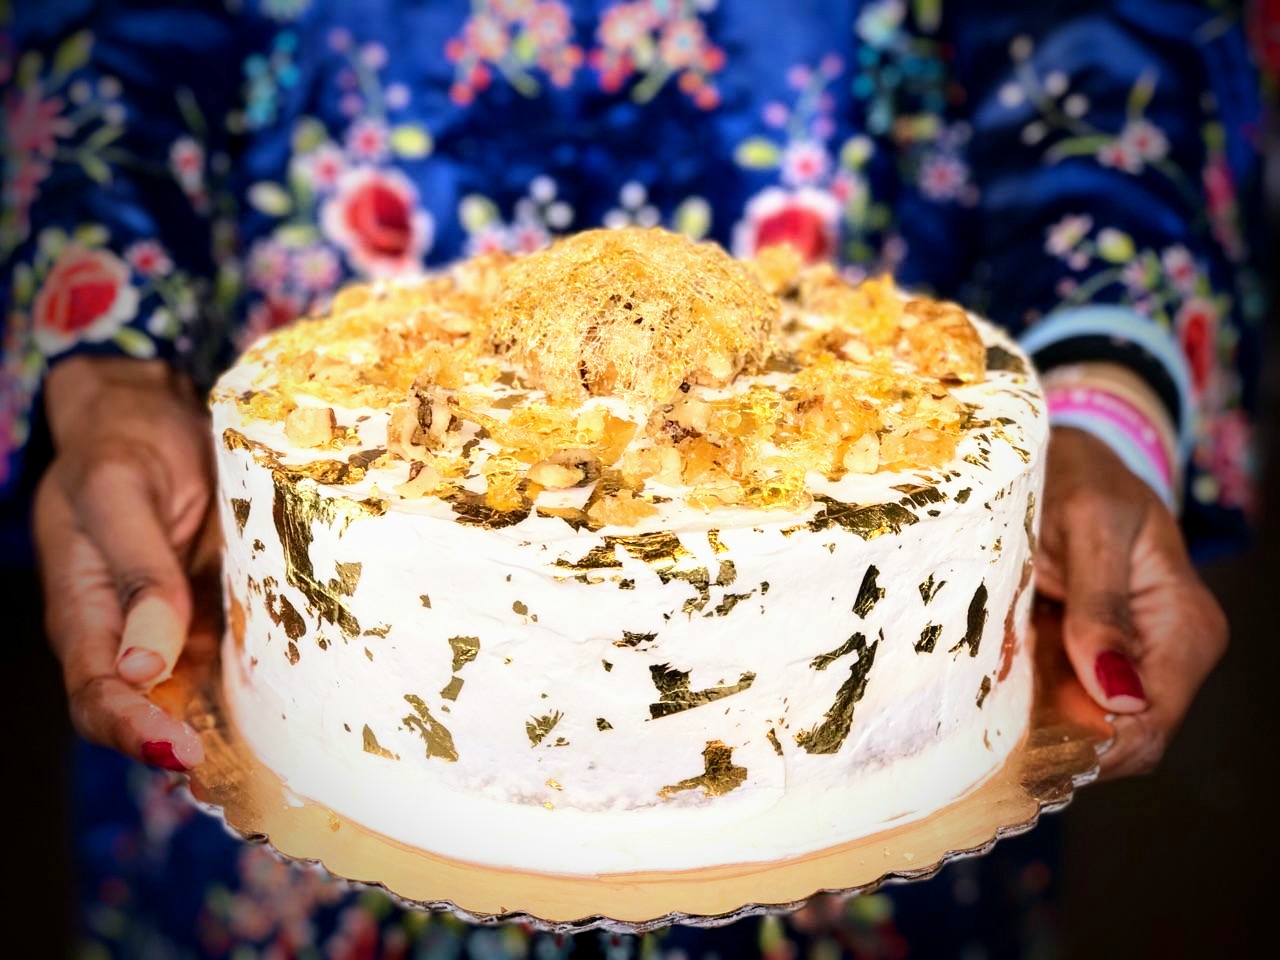 Image of frosted cake decorated with edible gold and spun sugar.